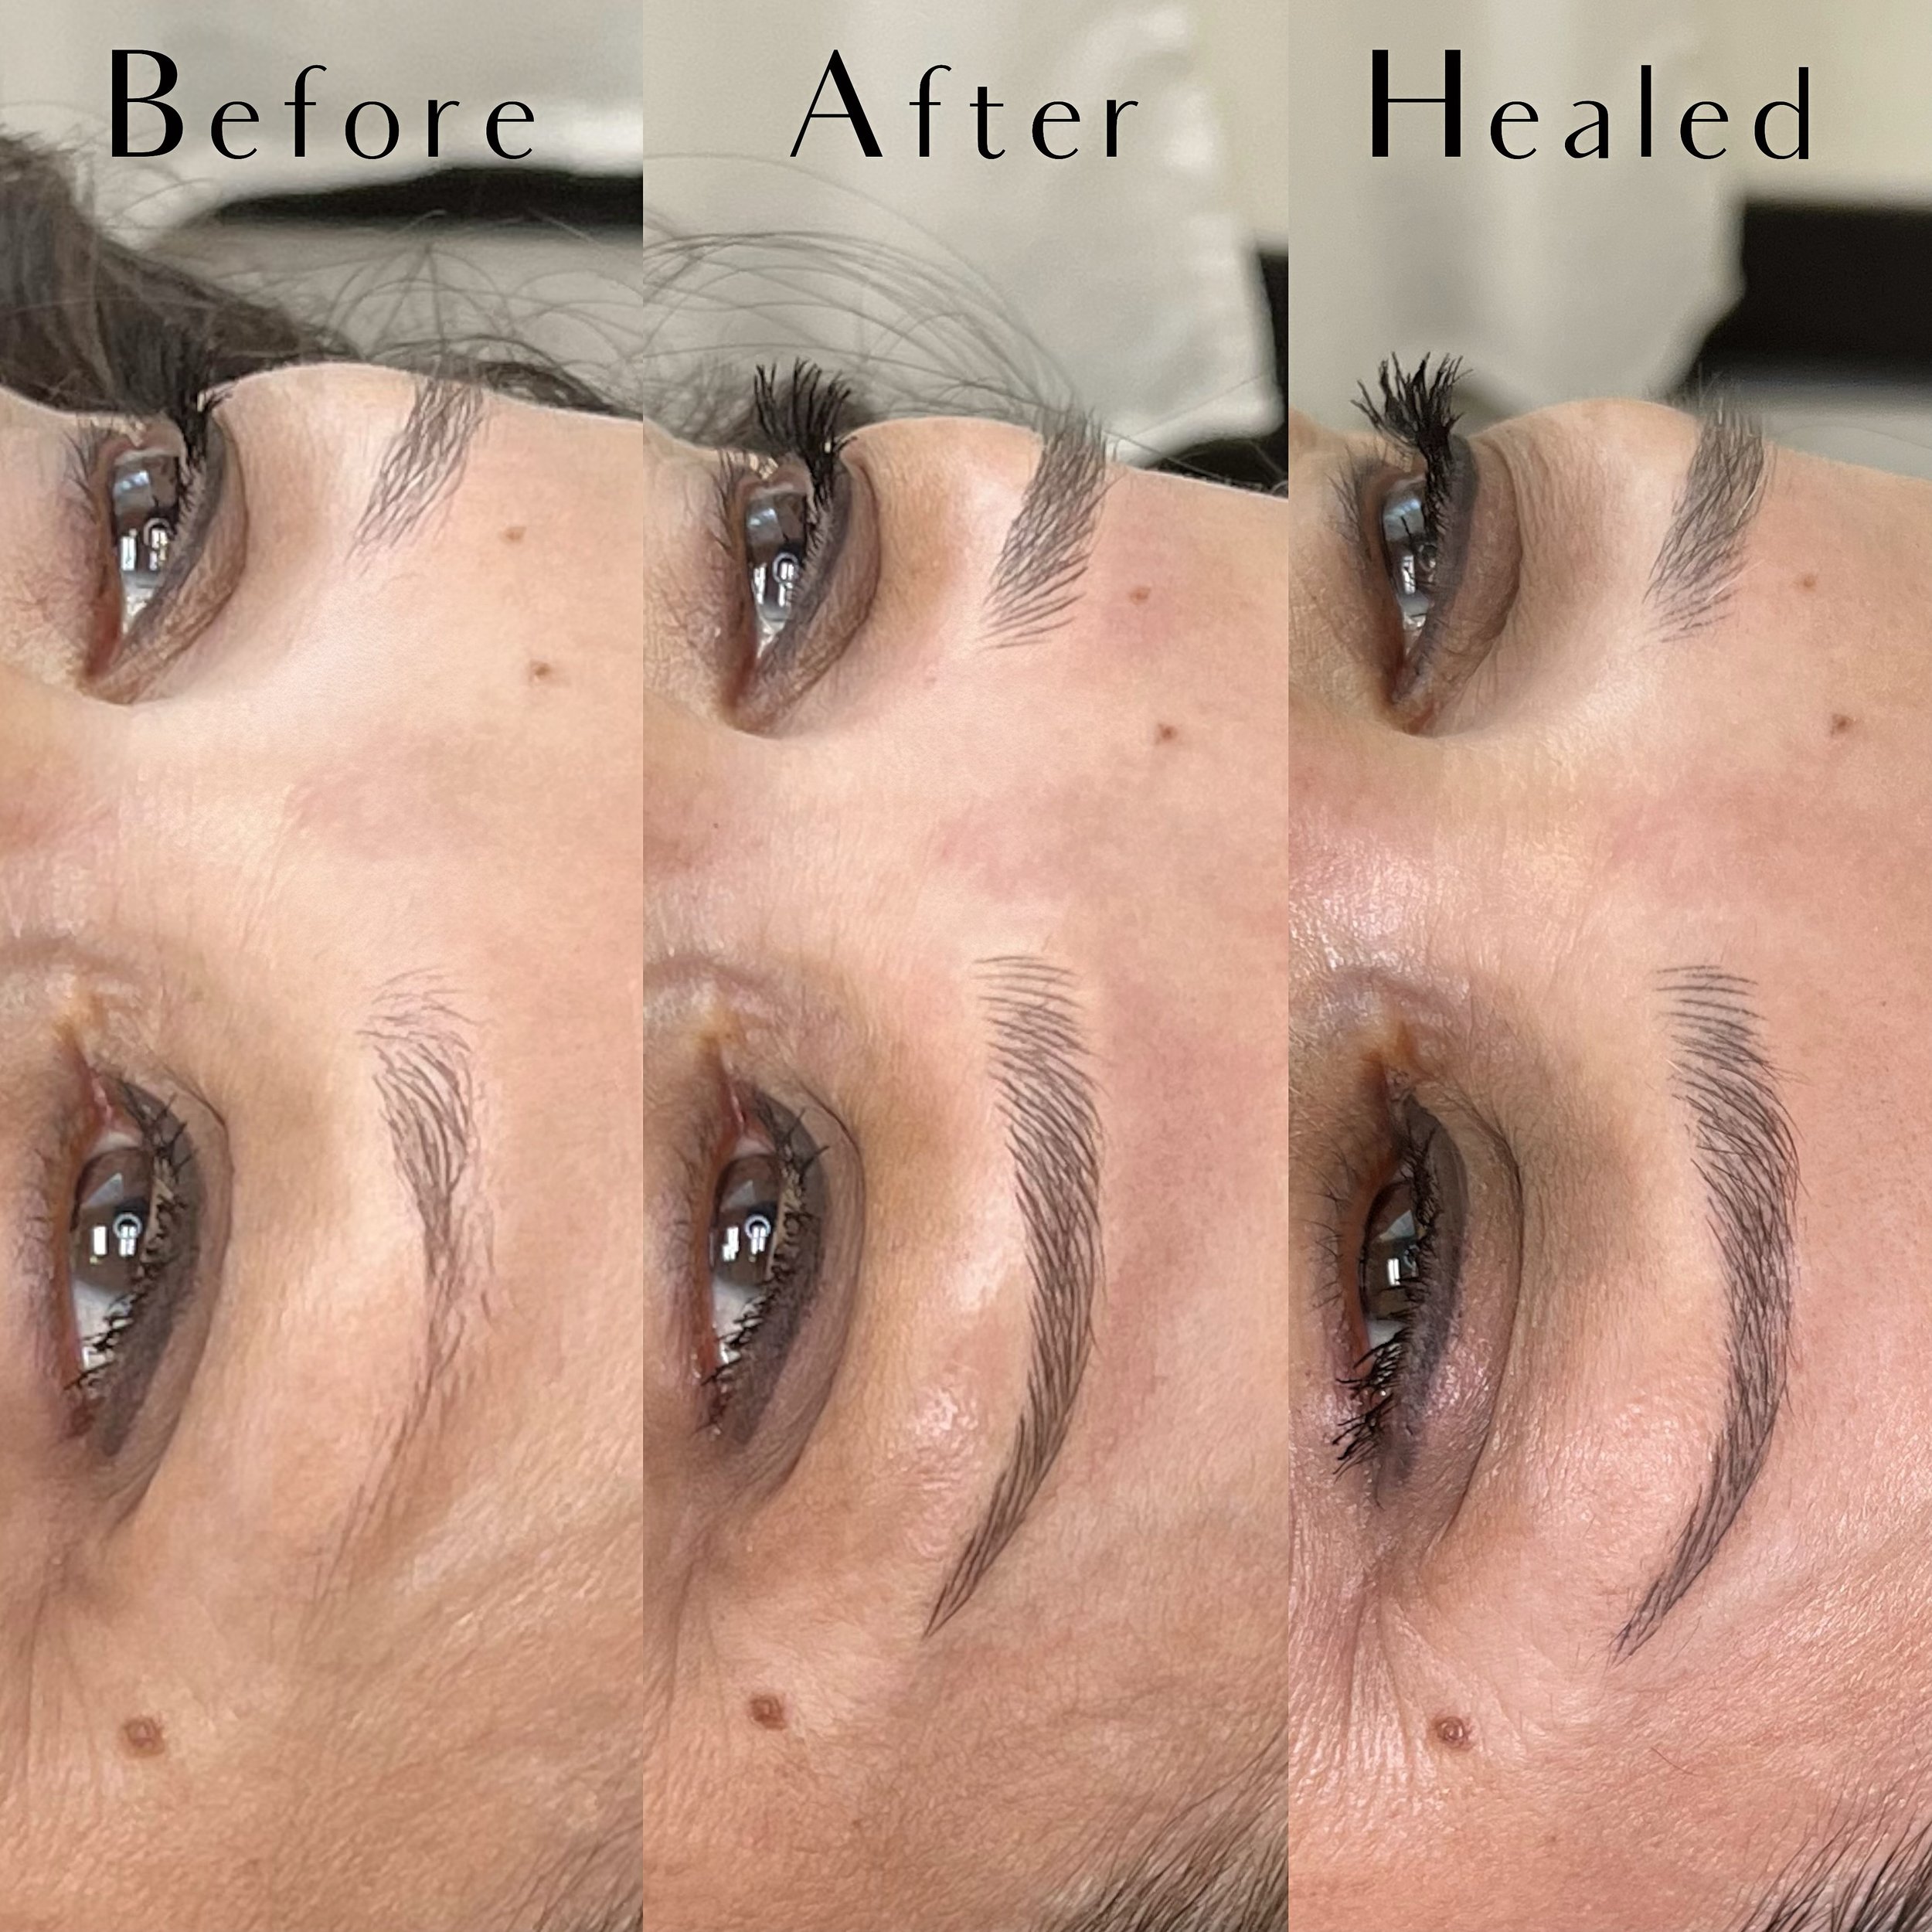 How do we achieve such fabulous healed microblading? By being the right candidate!

Being the ideal candidate means you have smooth skin, small pores, normal/dry skin, medium/fine hair texture AND density. Hair that is sparsely spread over the whole 